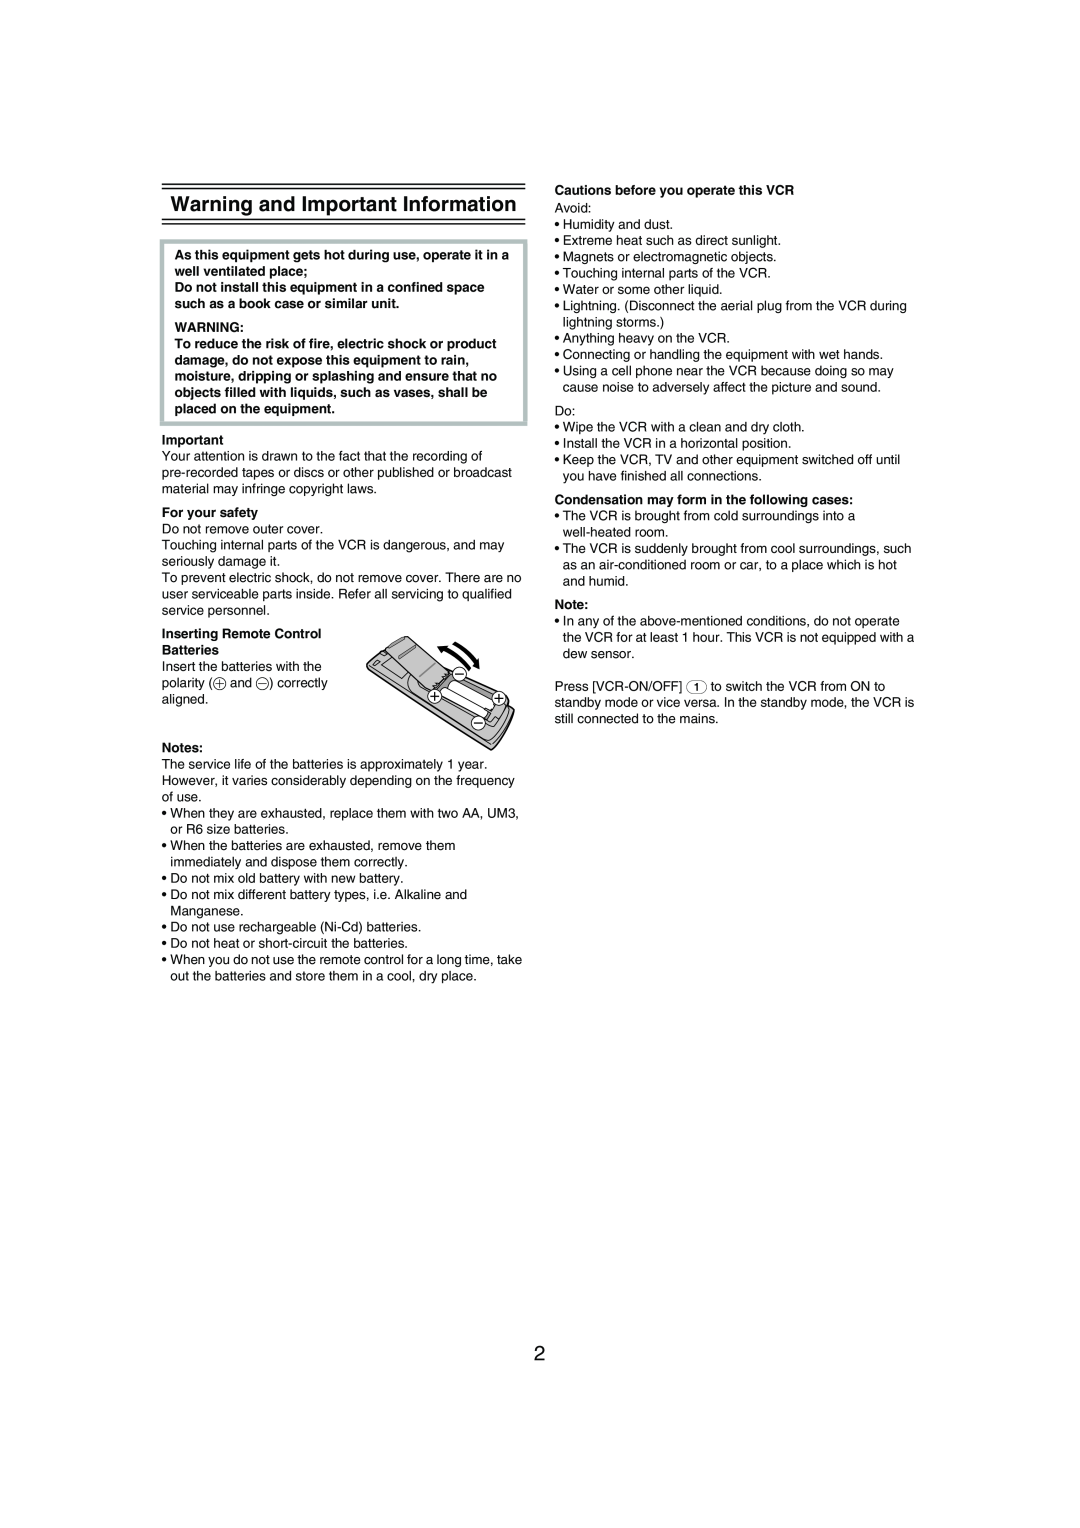 Panasonic NV-MV21 Series Warning and Important Information, For your safety, Inserting Remote Control Batteries 